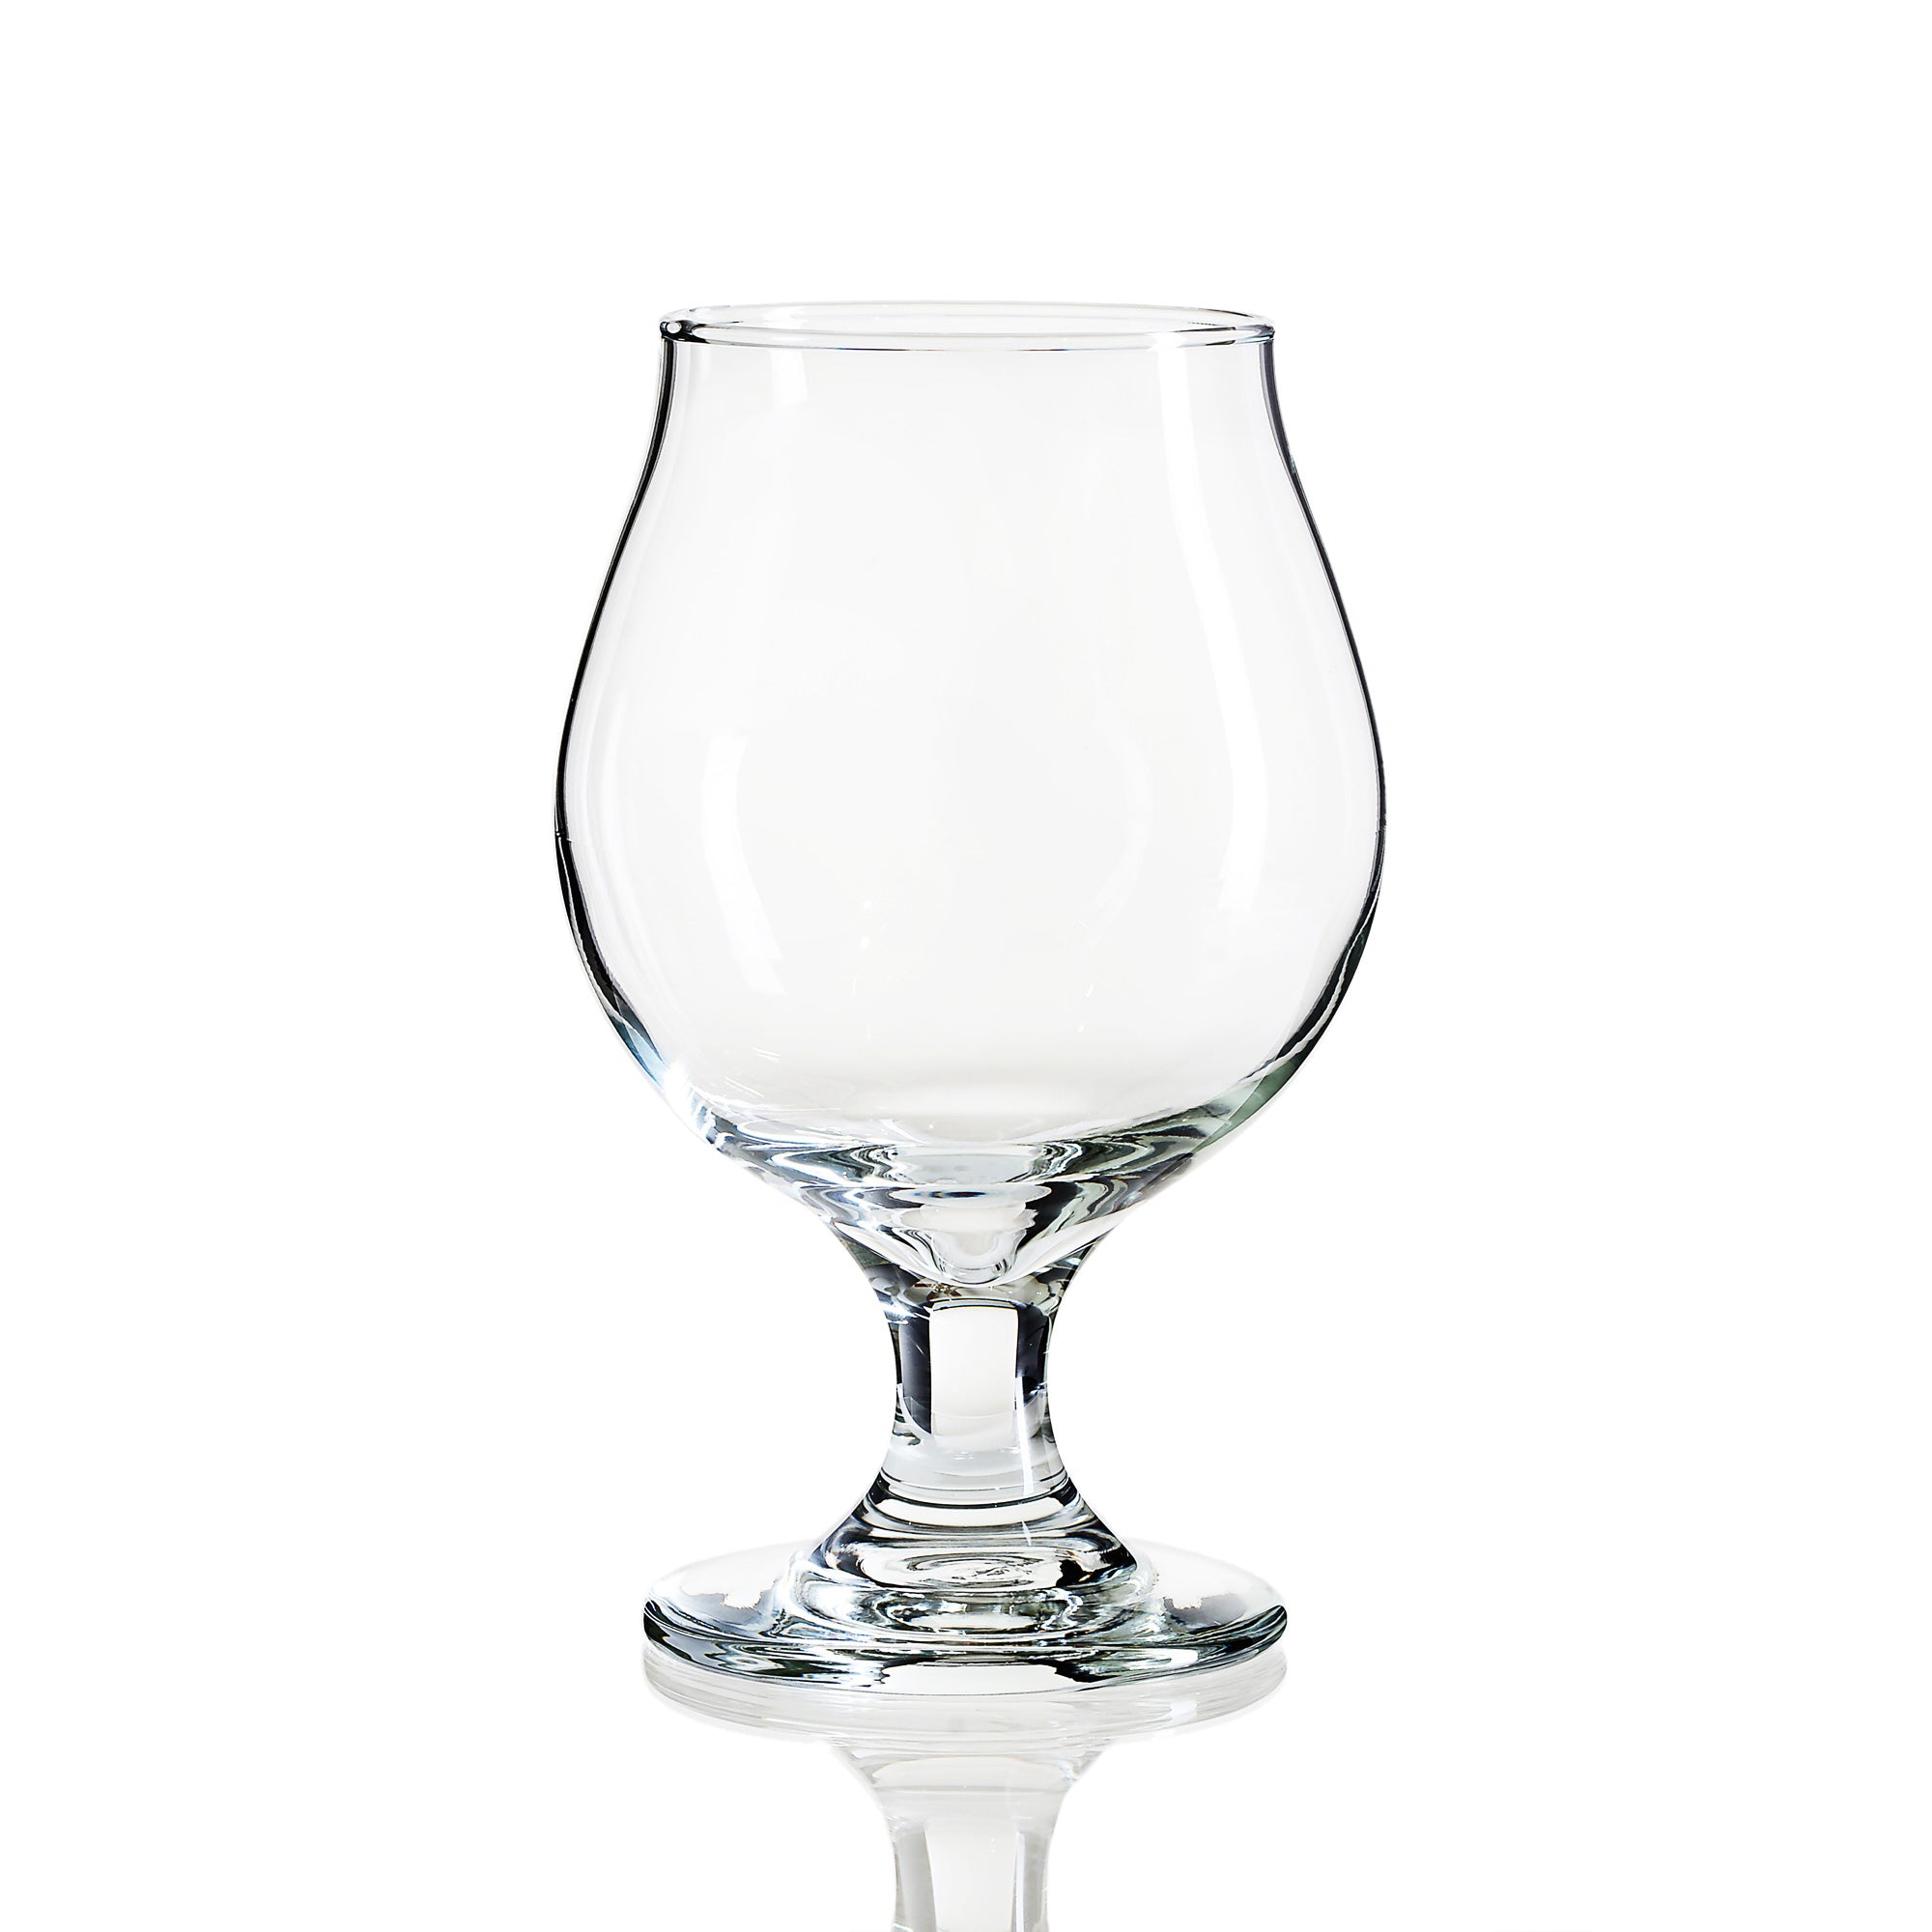 Libbey Can Shaped Beer Glass - 16 oz: Beer Glasses